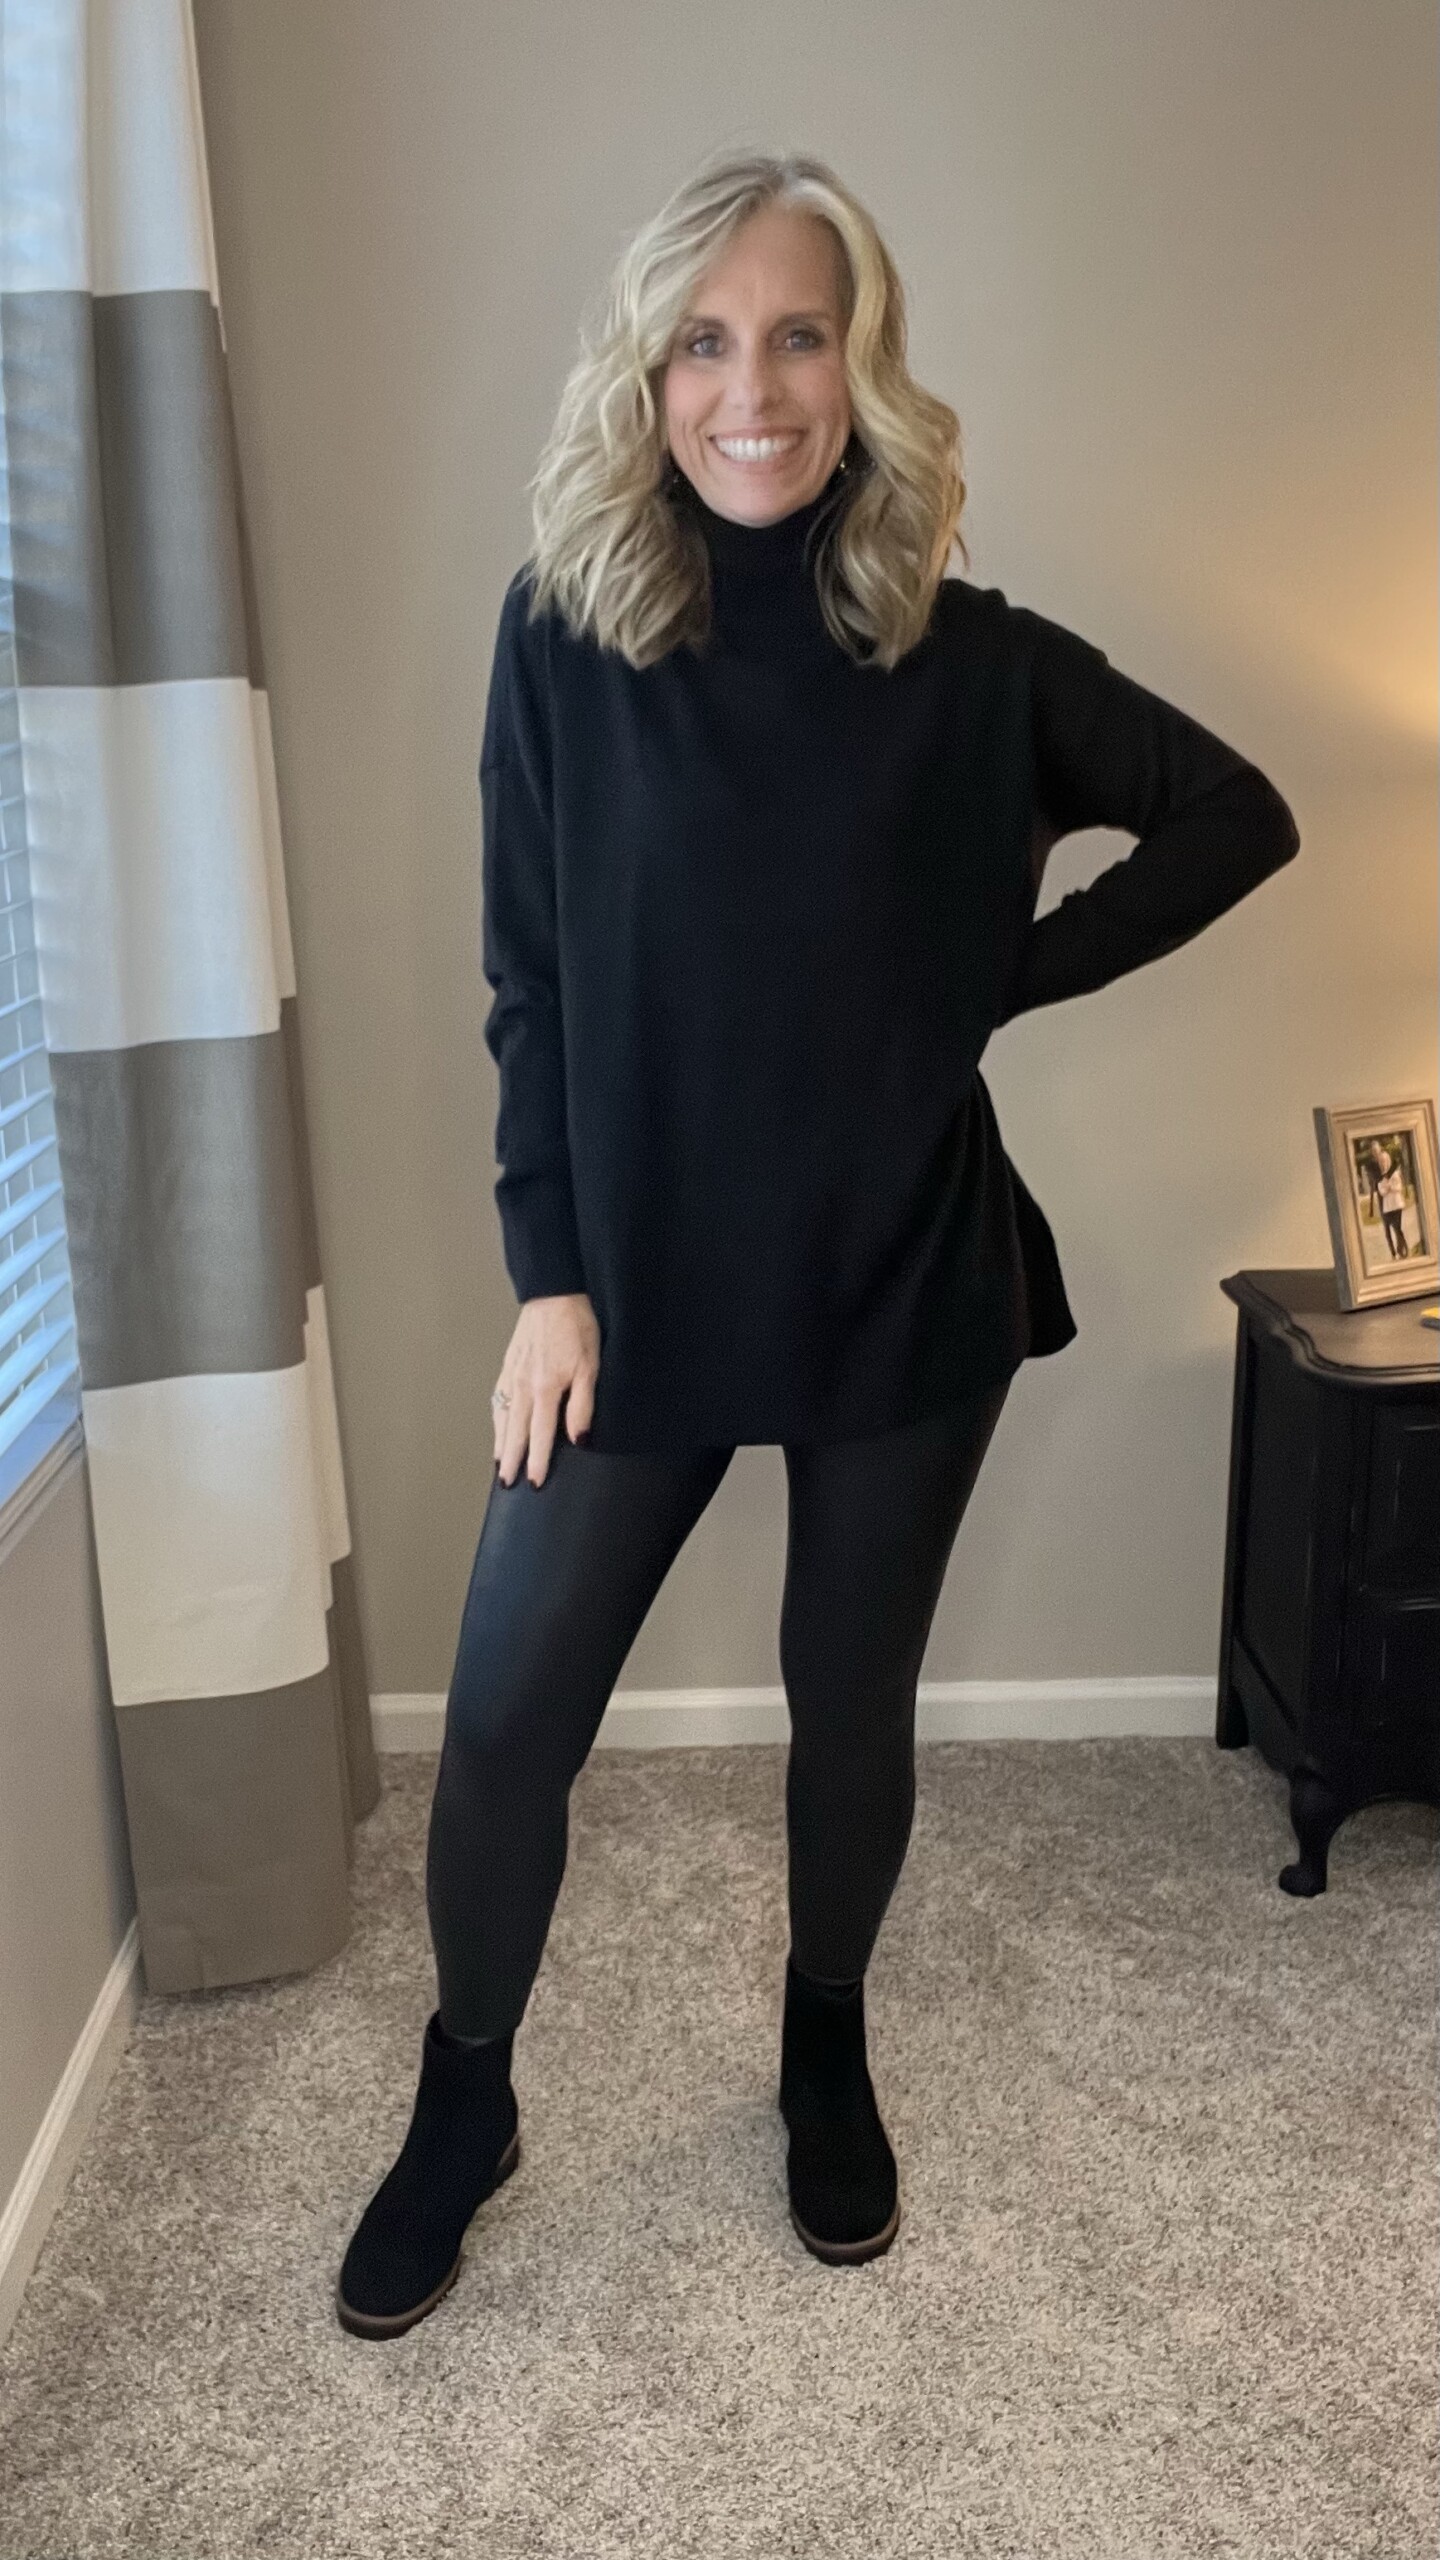 HOW TO WEAR BLACK